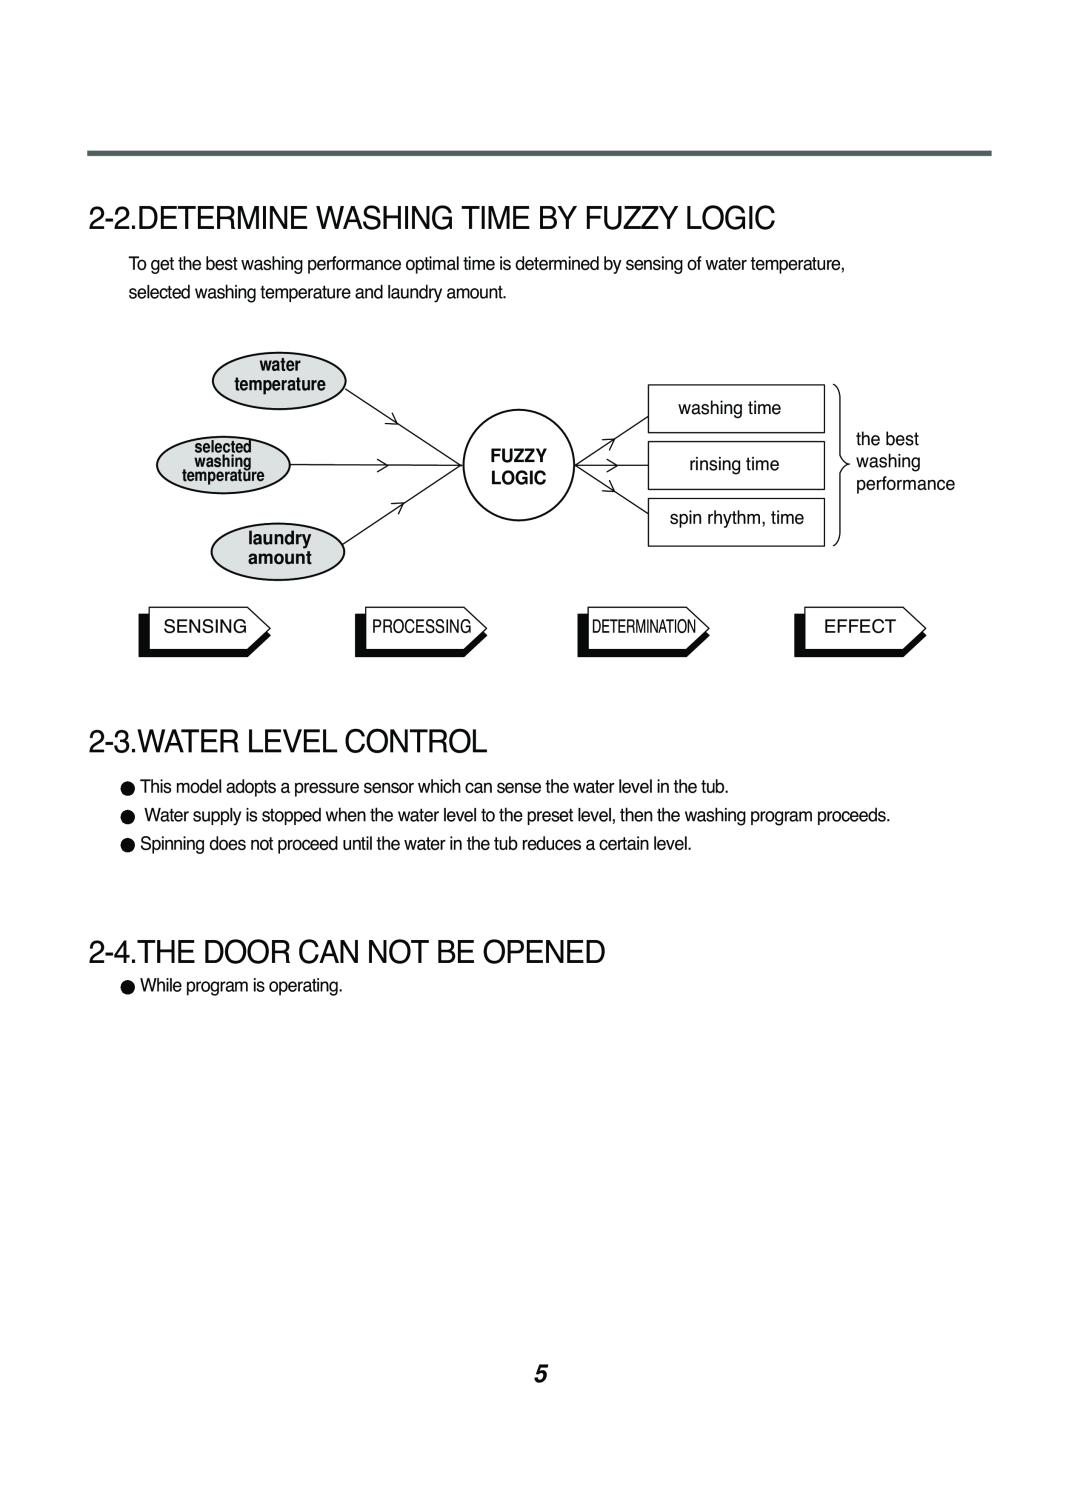 LG Electronics 10220(5)FDB(N) Determine Washing Time By Fuzzy Logic, Water Level Control, The Door Can Not Be Opened 